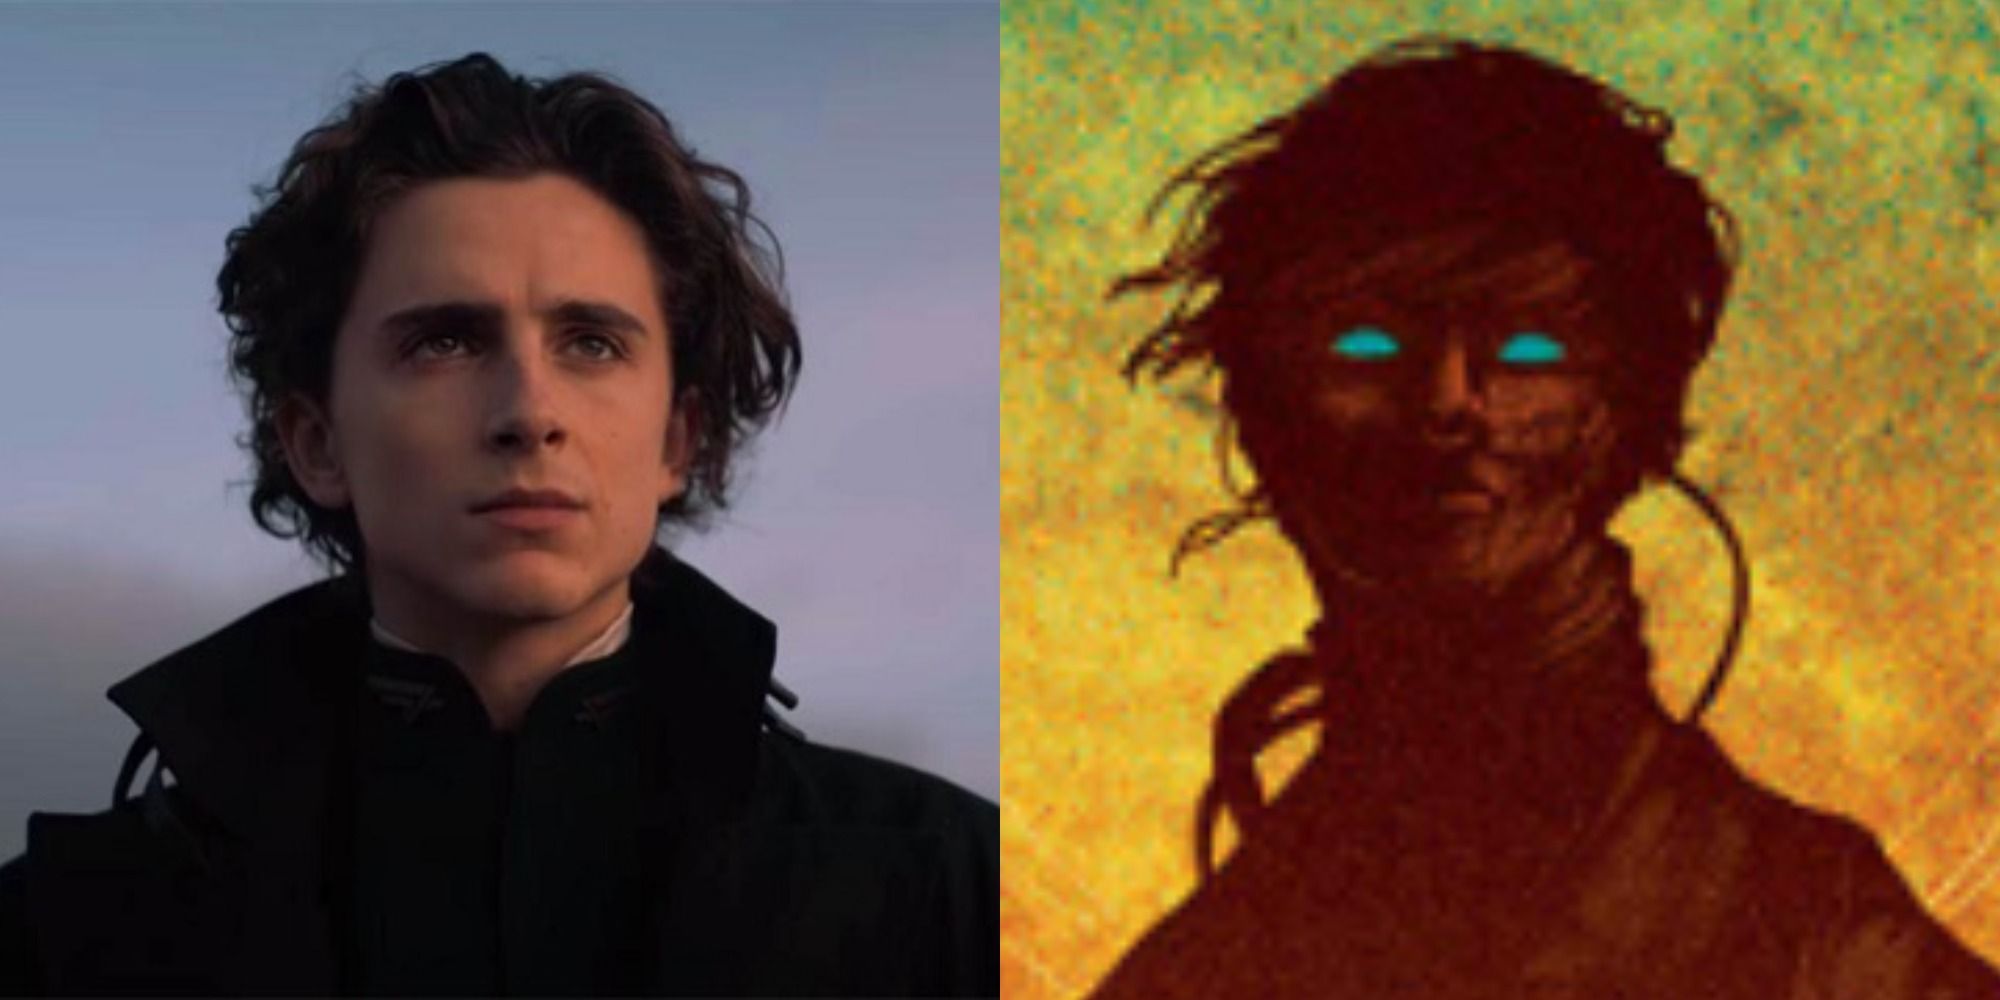 Dune How The Characters Are Supposed To Look (According To The Books)